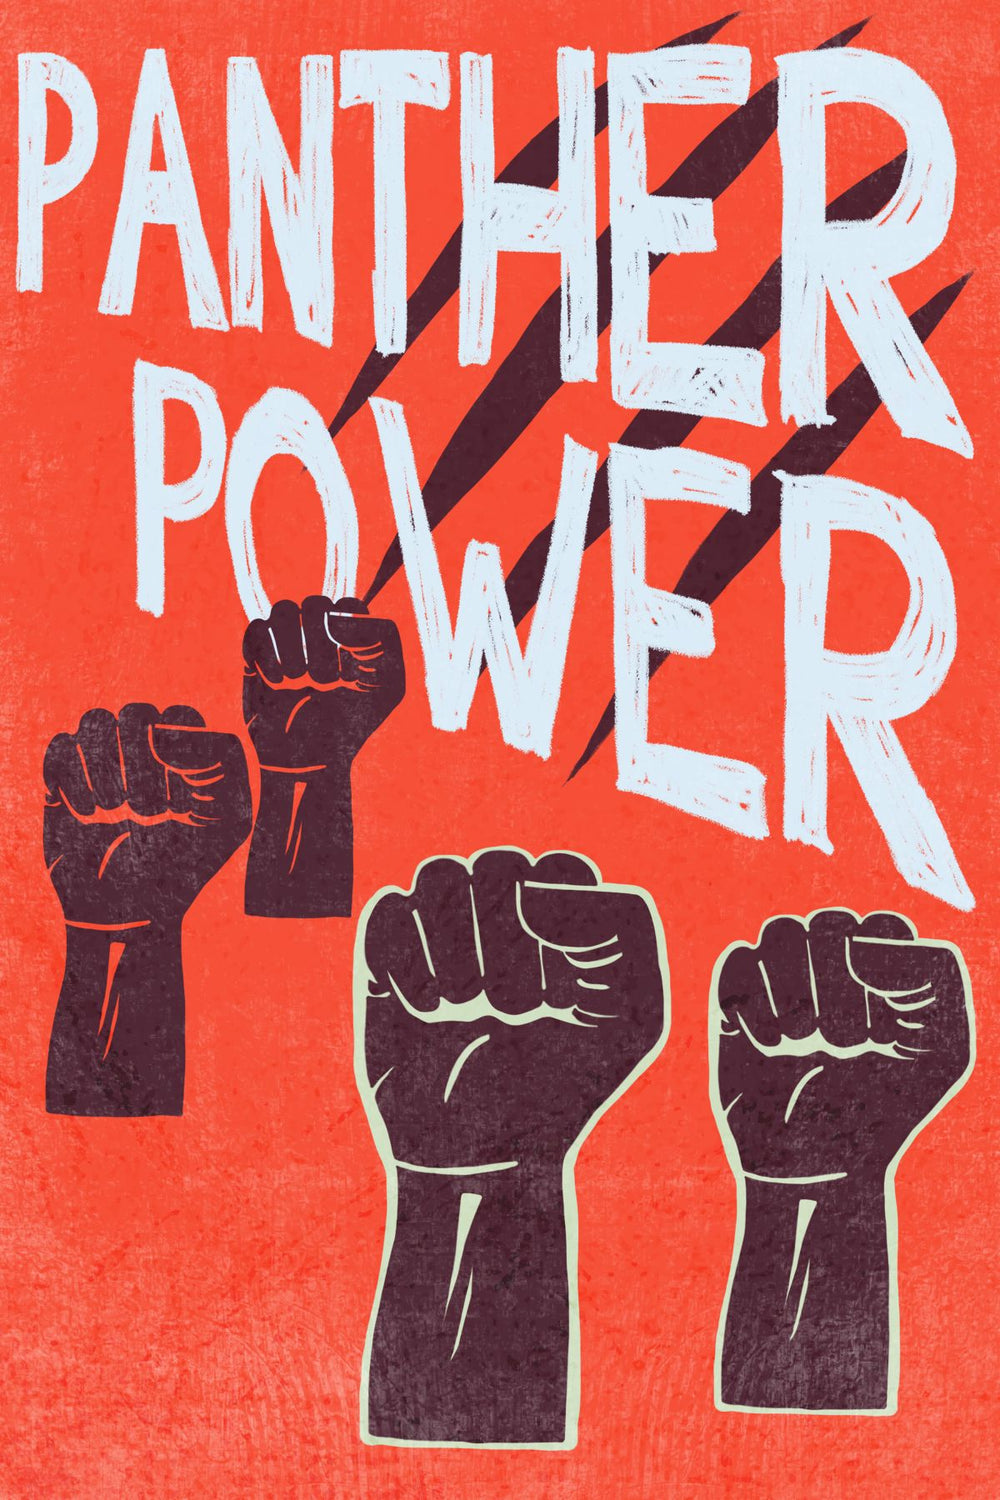 Panther Power